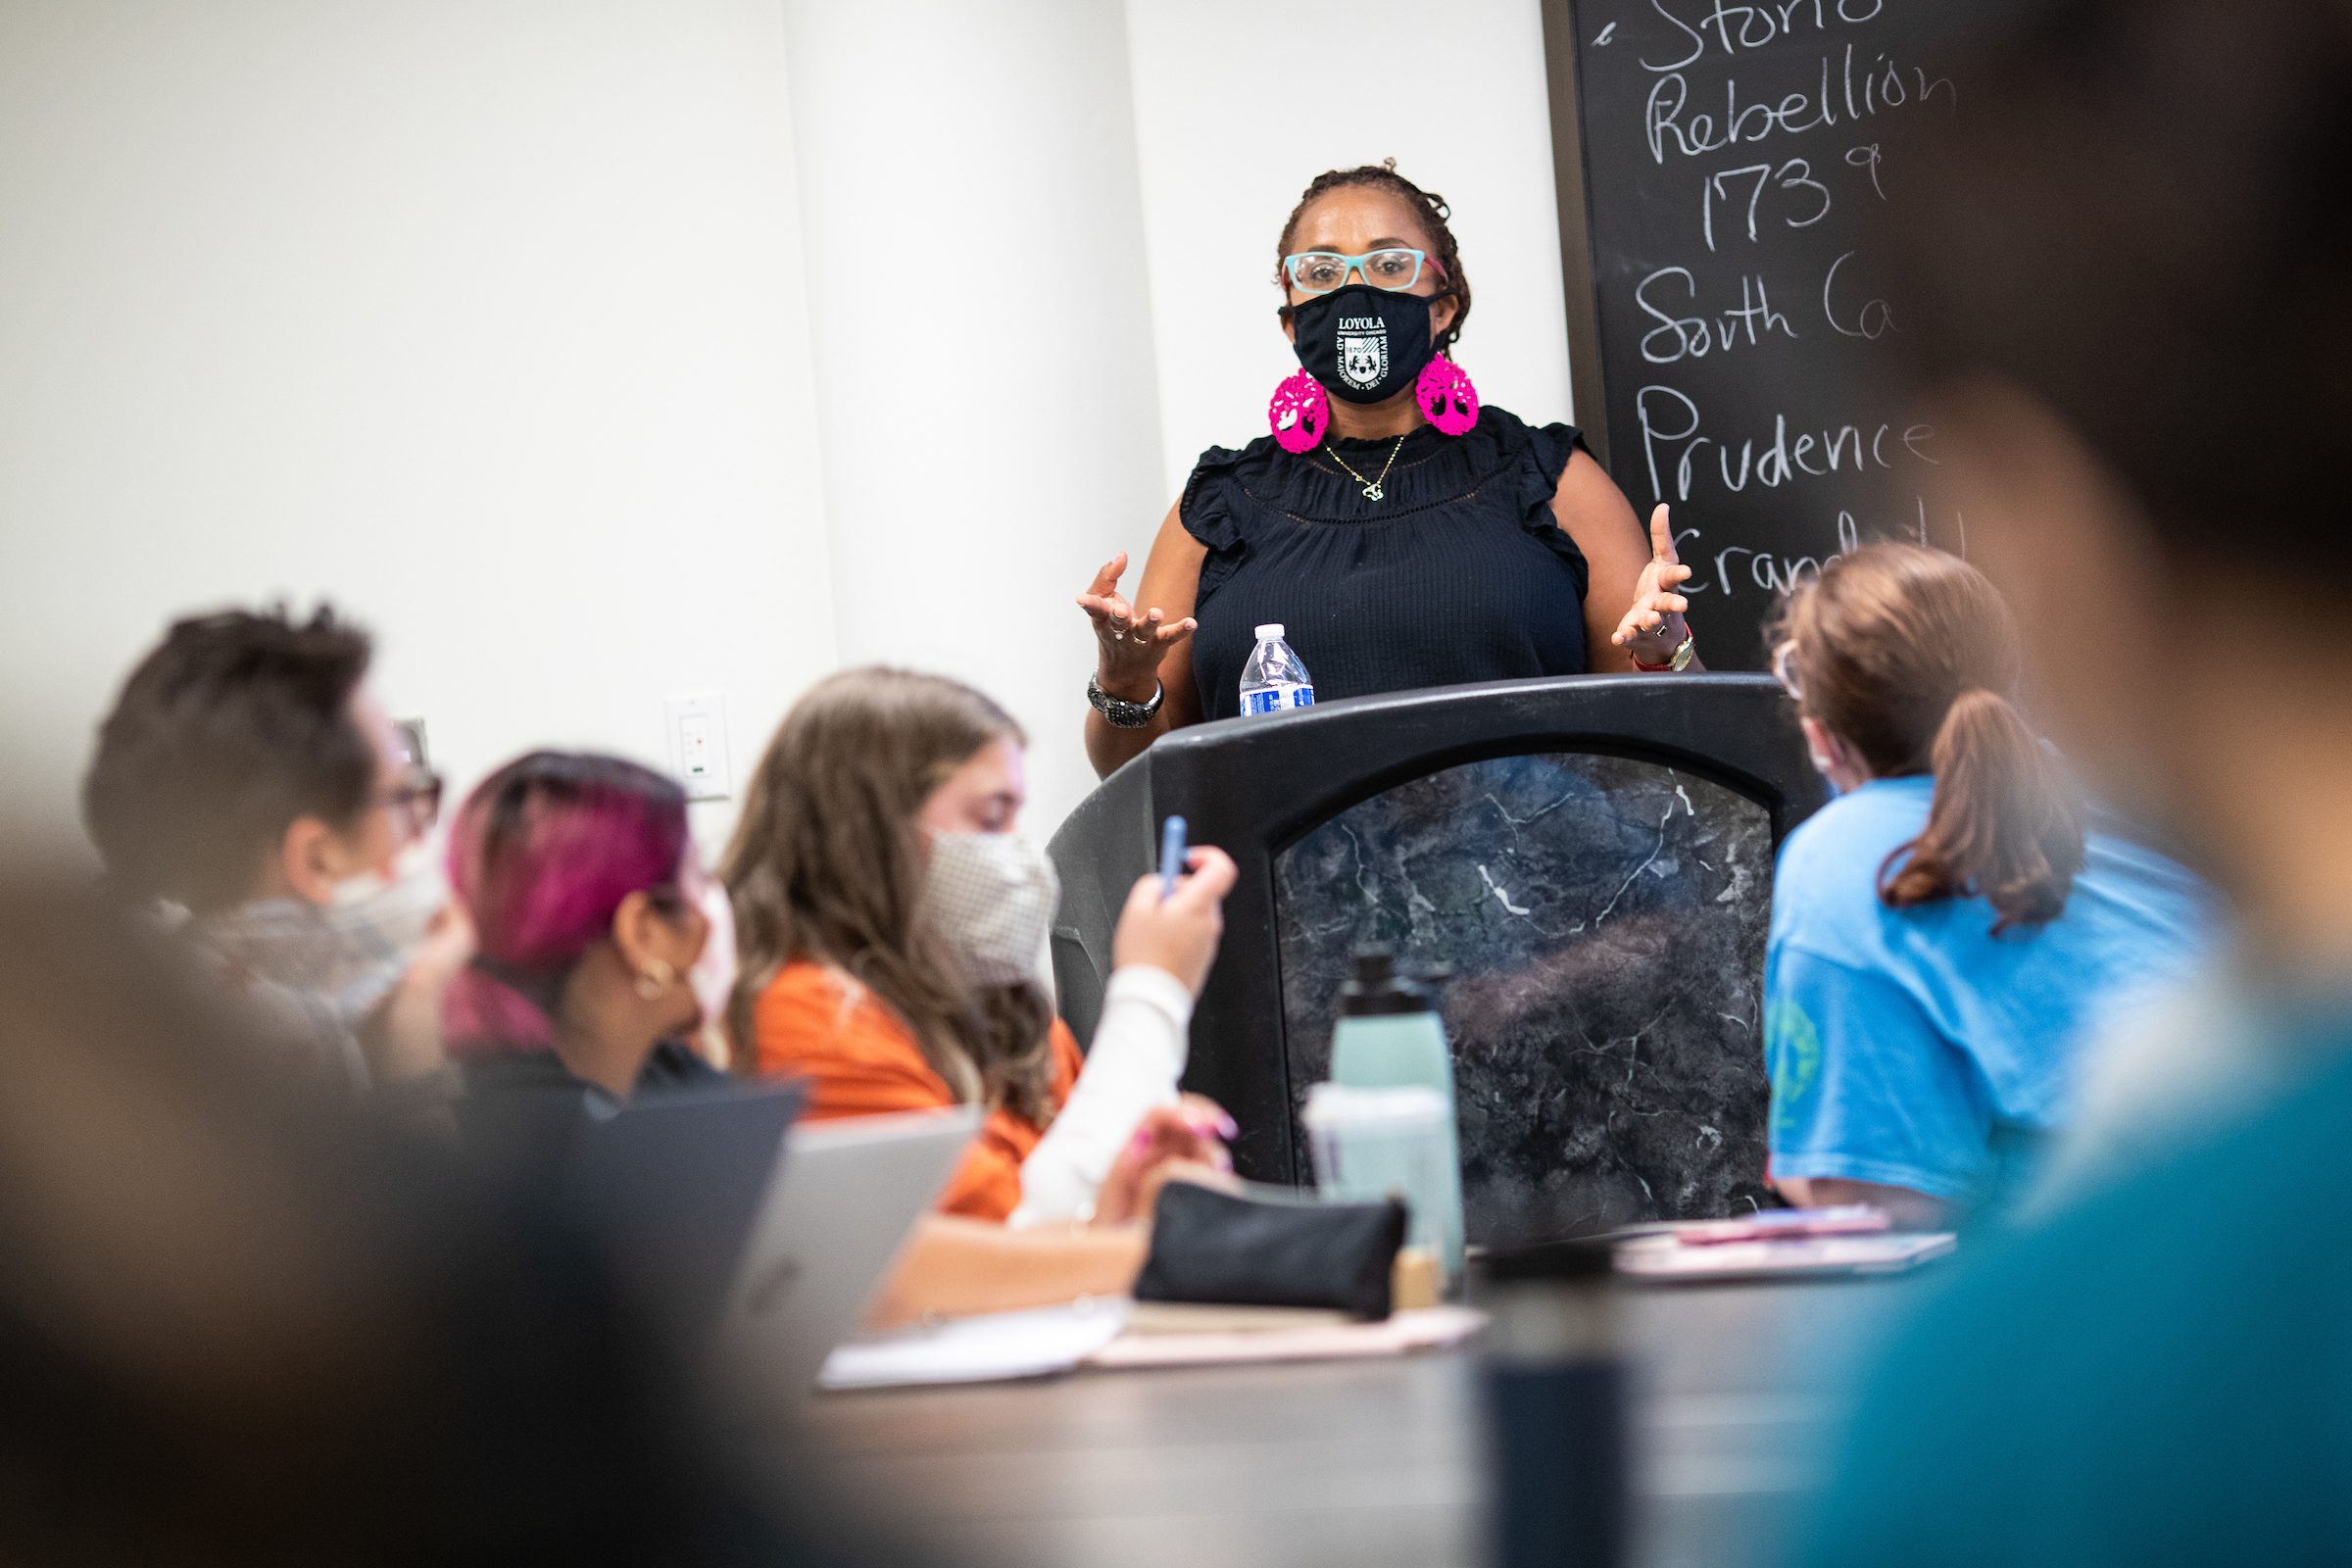 Loyola University Chicago Professor Tikia Hamilton teaches an African-American history course in the Crown Center on September 28, 2021. (Photo: Lukas Keapproth)